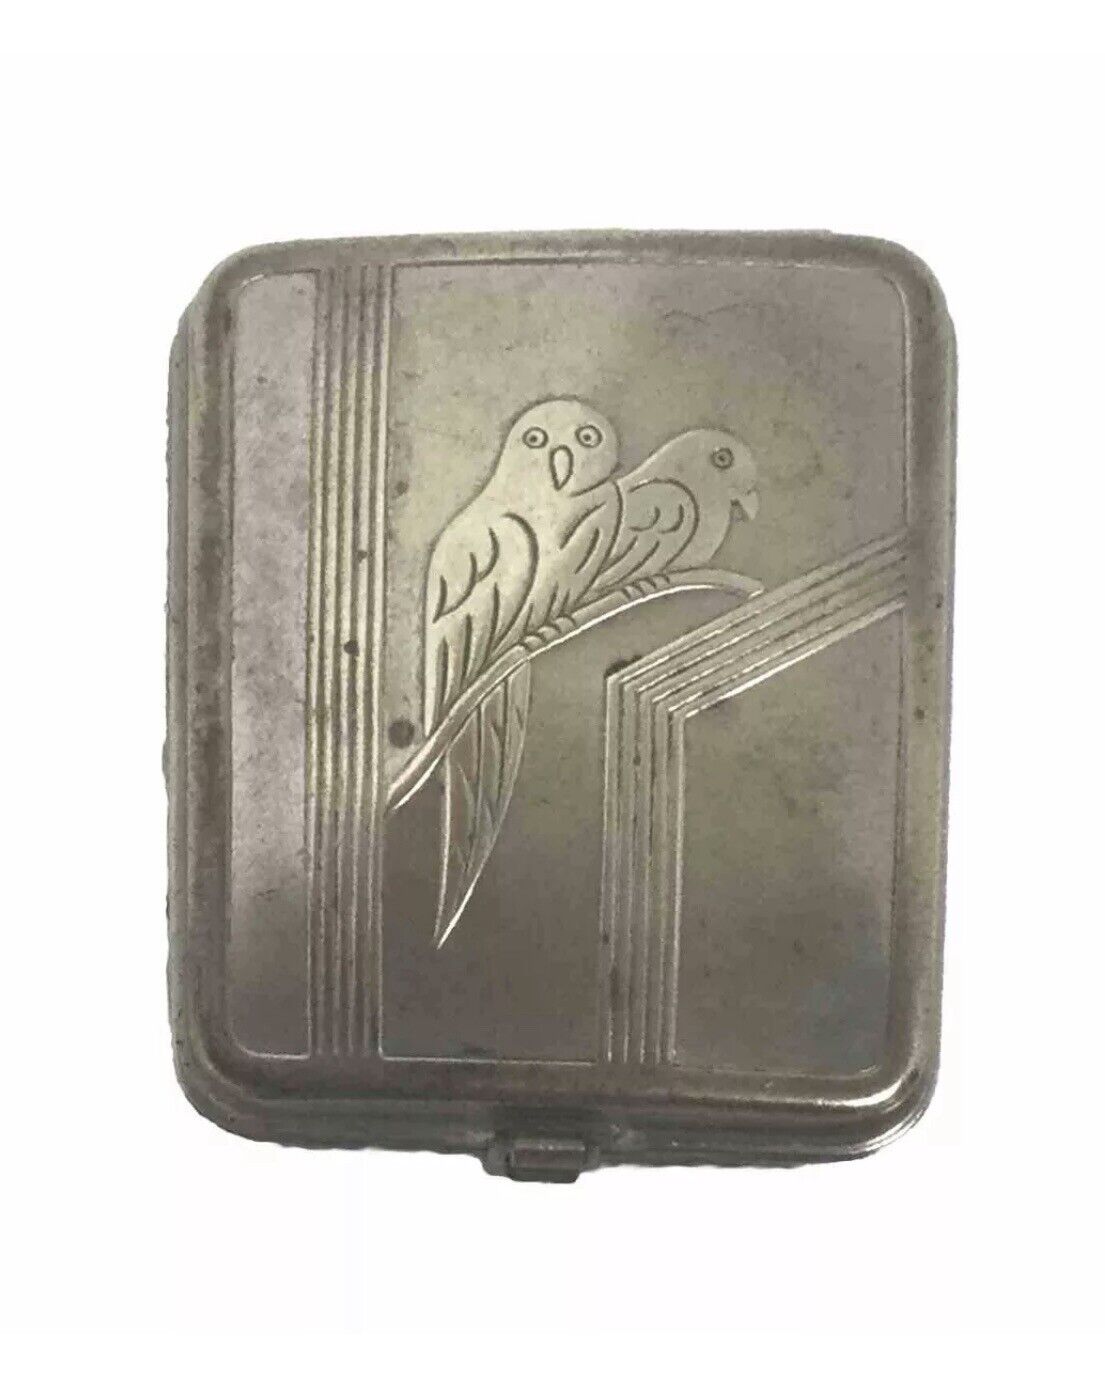 Unusual Early Combination Compact Owls Powder Rouge Vintage 